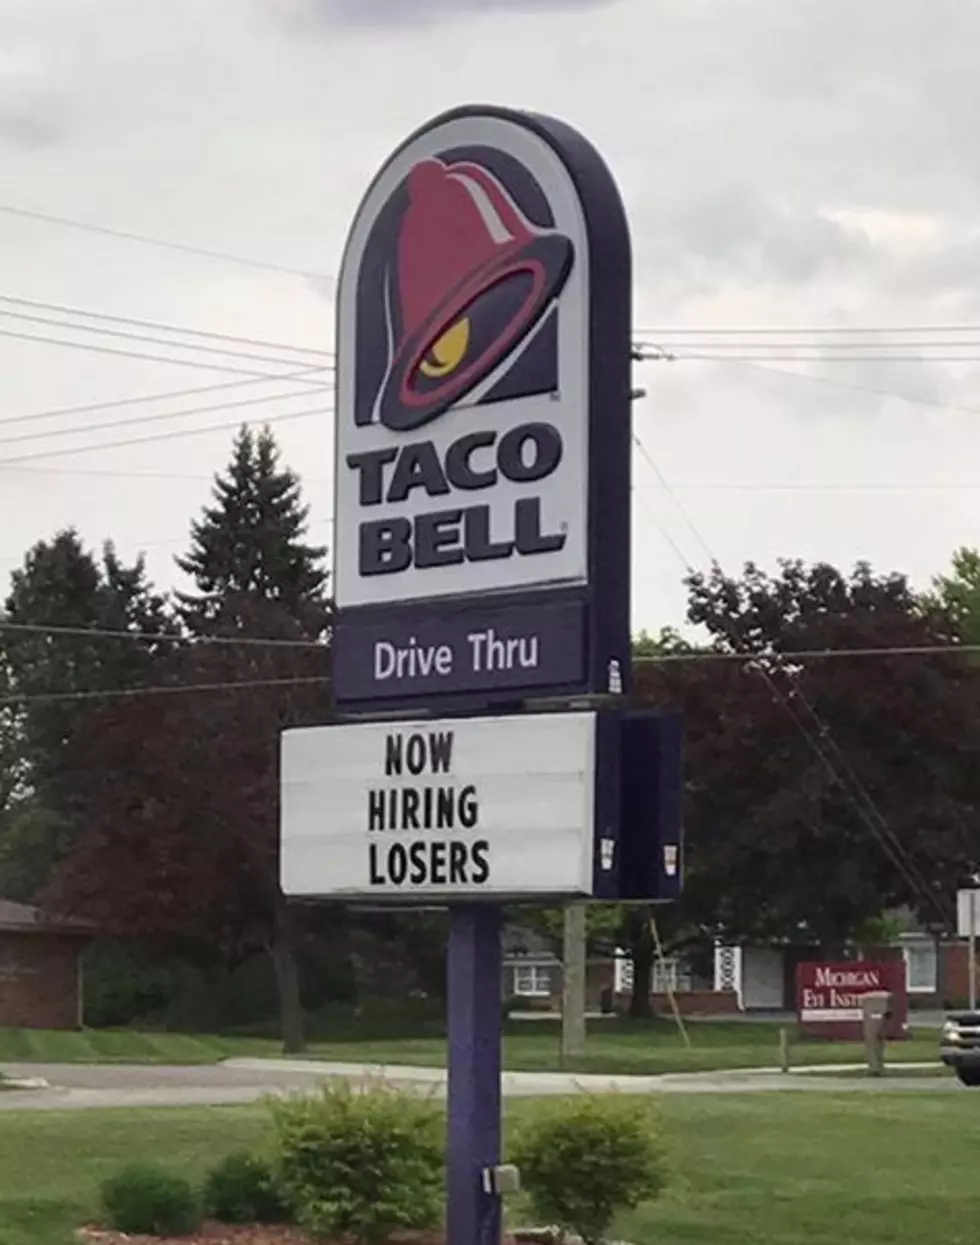 Lapeer Taco Bell Puts Up Hiring Sign, Missing a Key Letter &#8212; Hilarity Ensues [PHOTO]